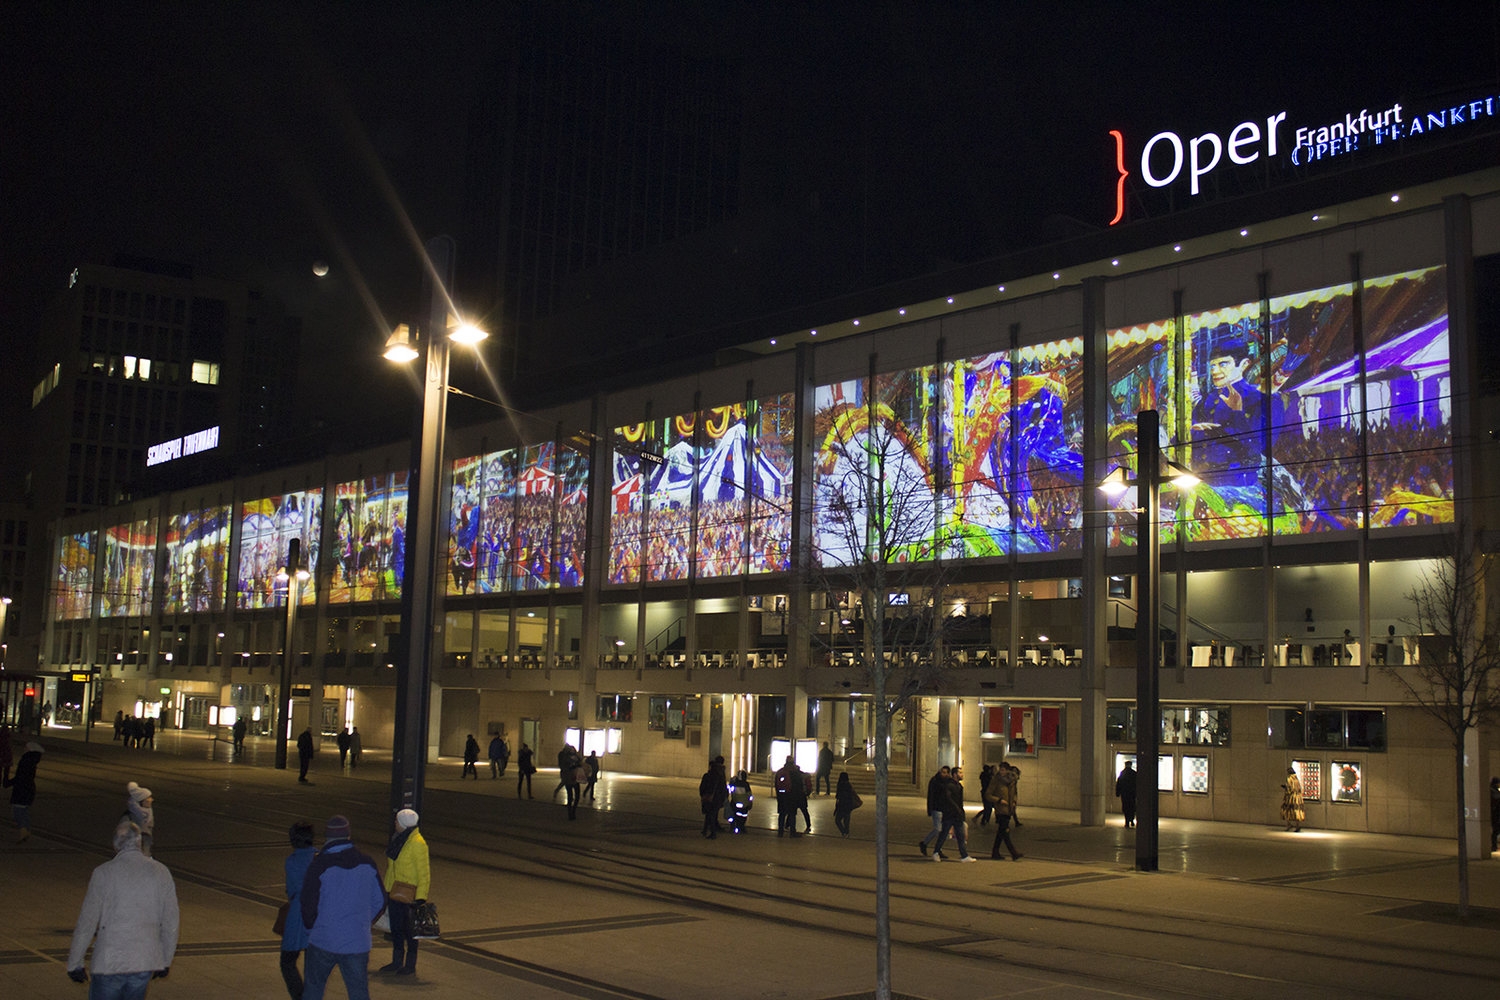 The Great Farce,&nbsp;2017, nine channel video installation, color, sounds,&nbsp;8:11 minutes.
Installation view of Schauspiel Frankfurt in Frankfurt, Germany. Dimensions: 18 x 120 yd.